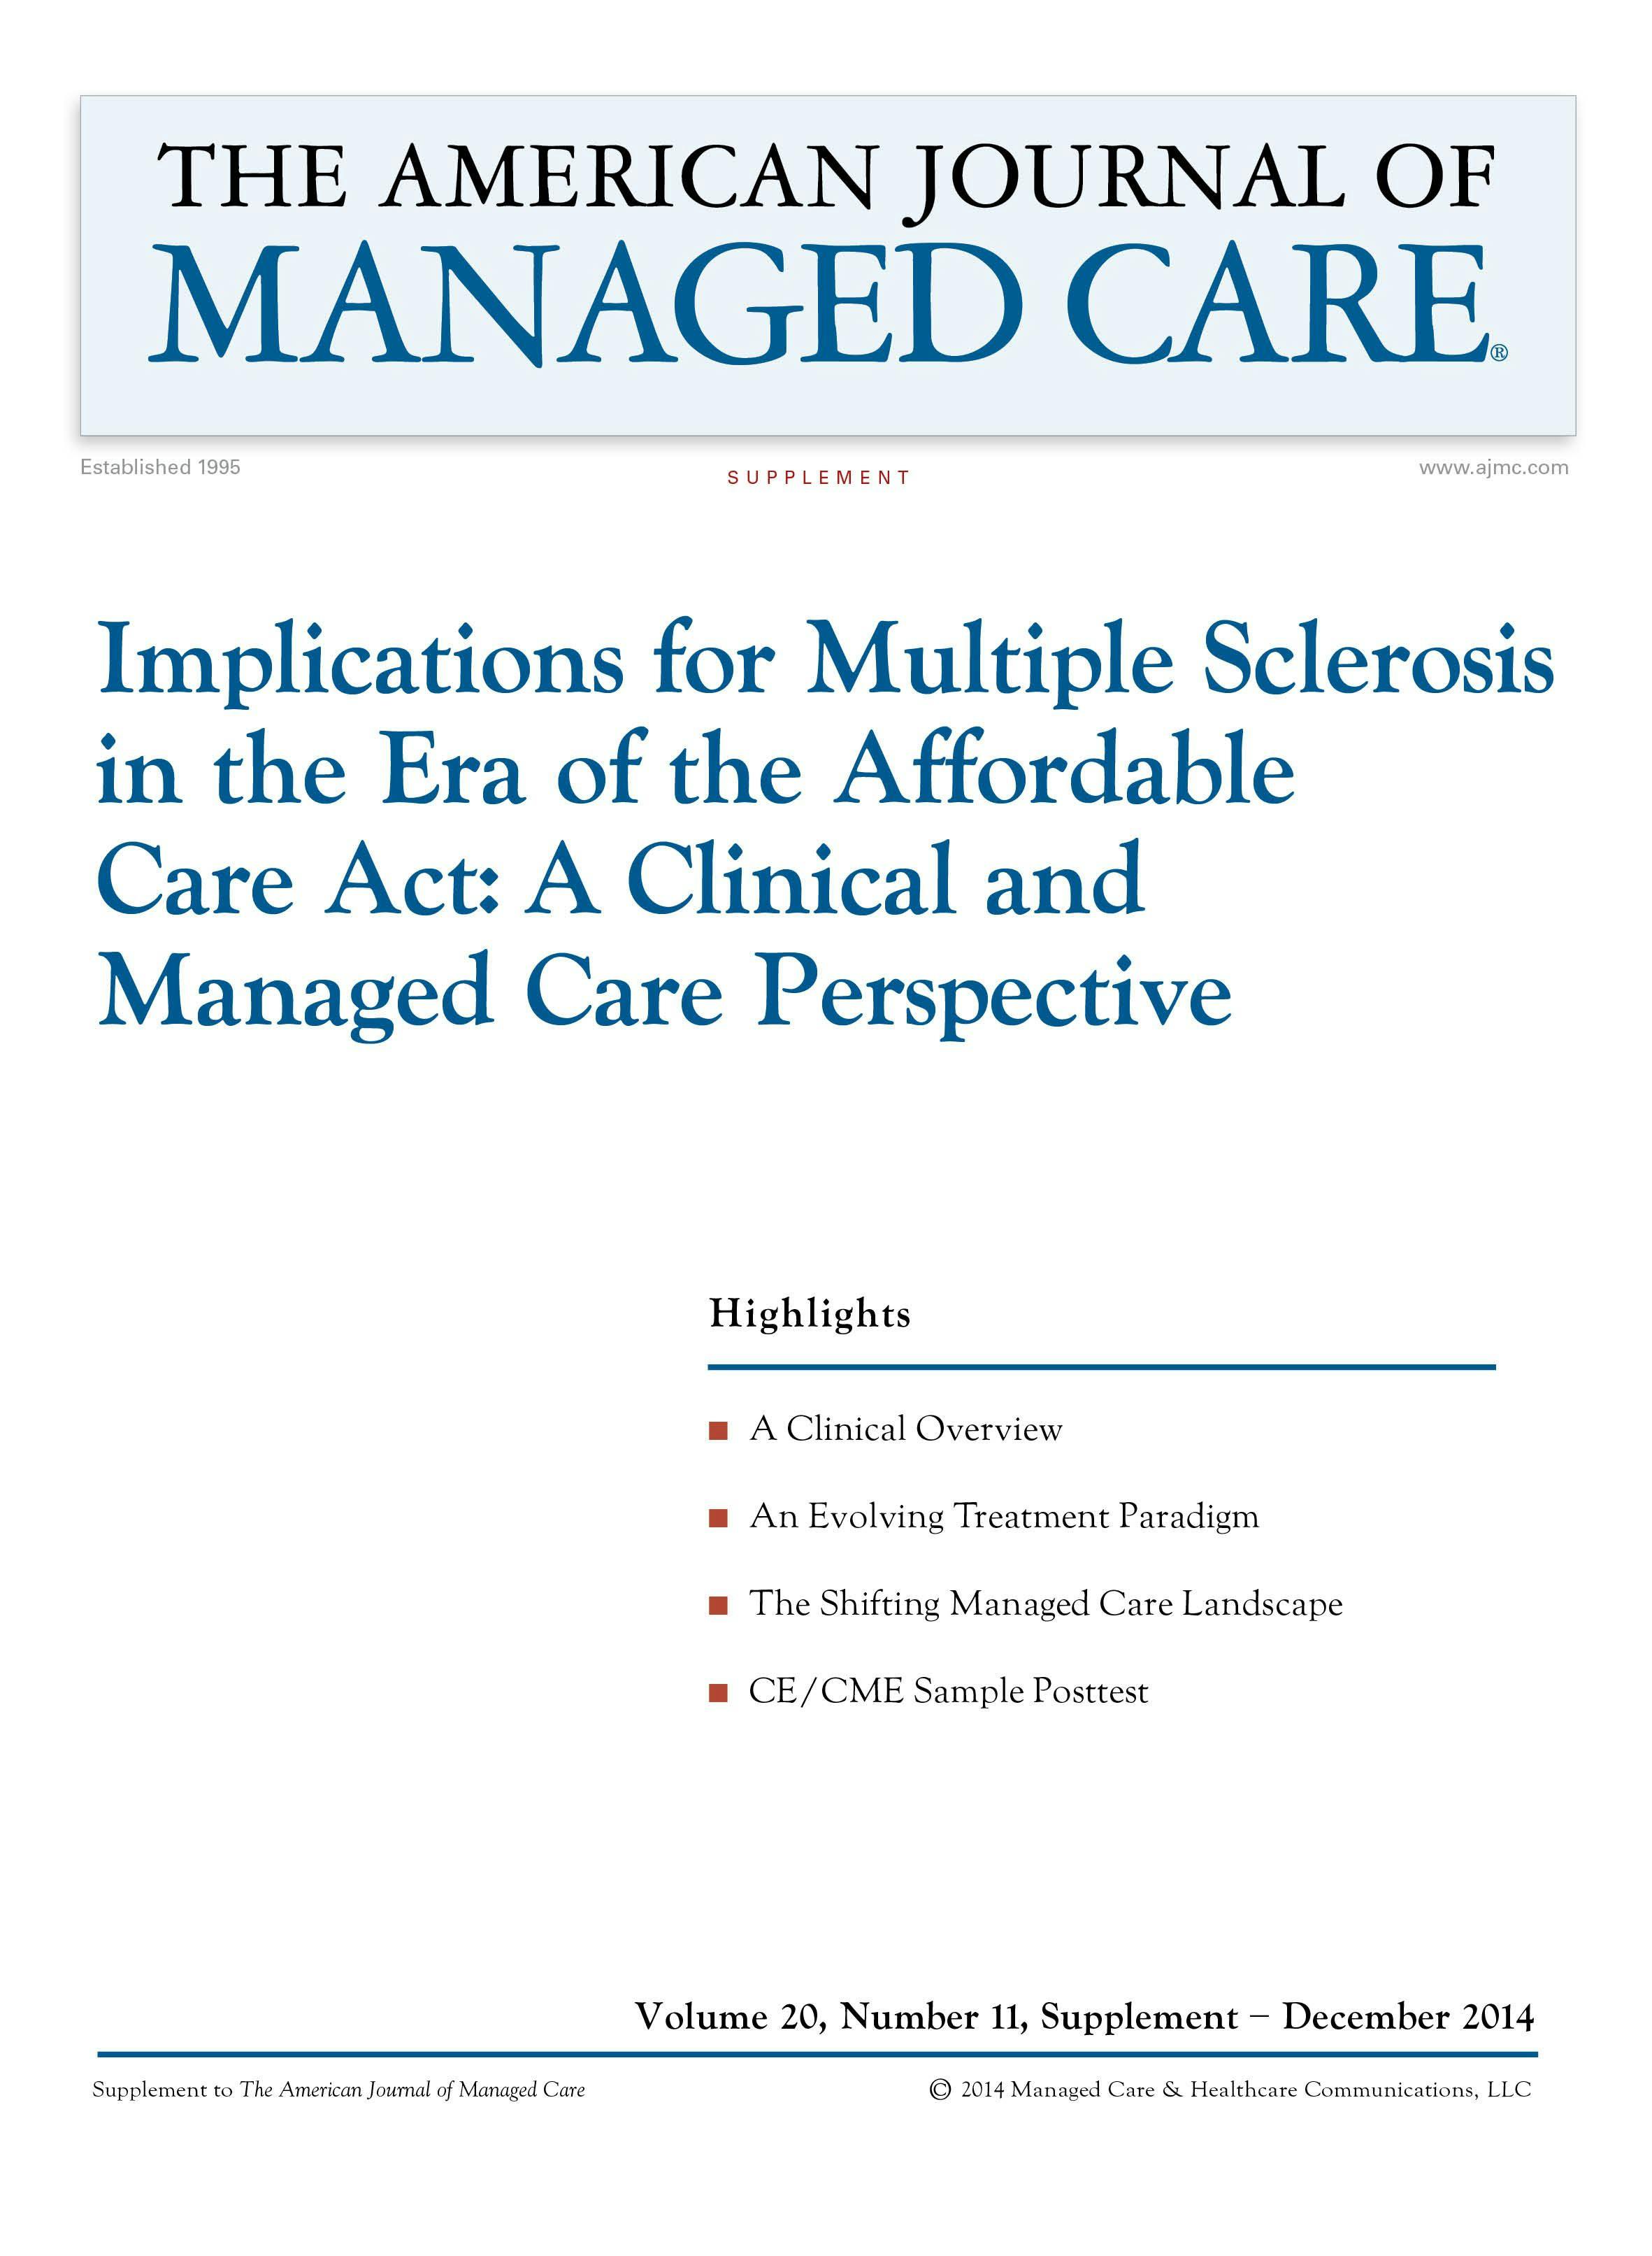 Implications for Multiple Sclerosis in the Era of the Affordable Care Act: A Clinical and Managed Ca